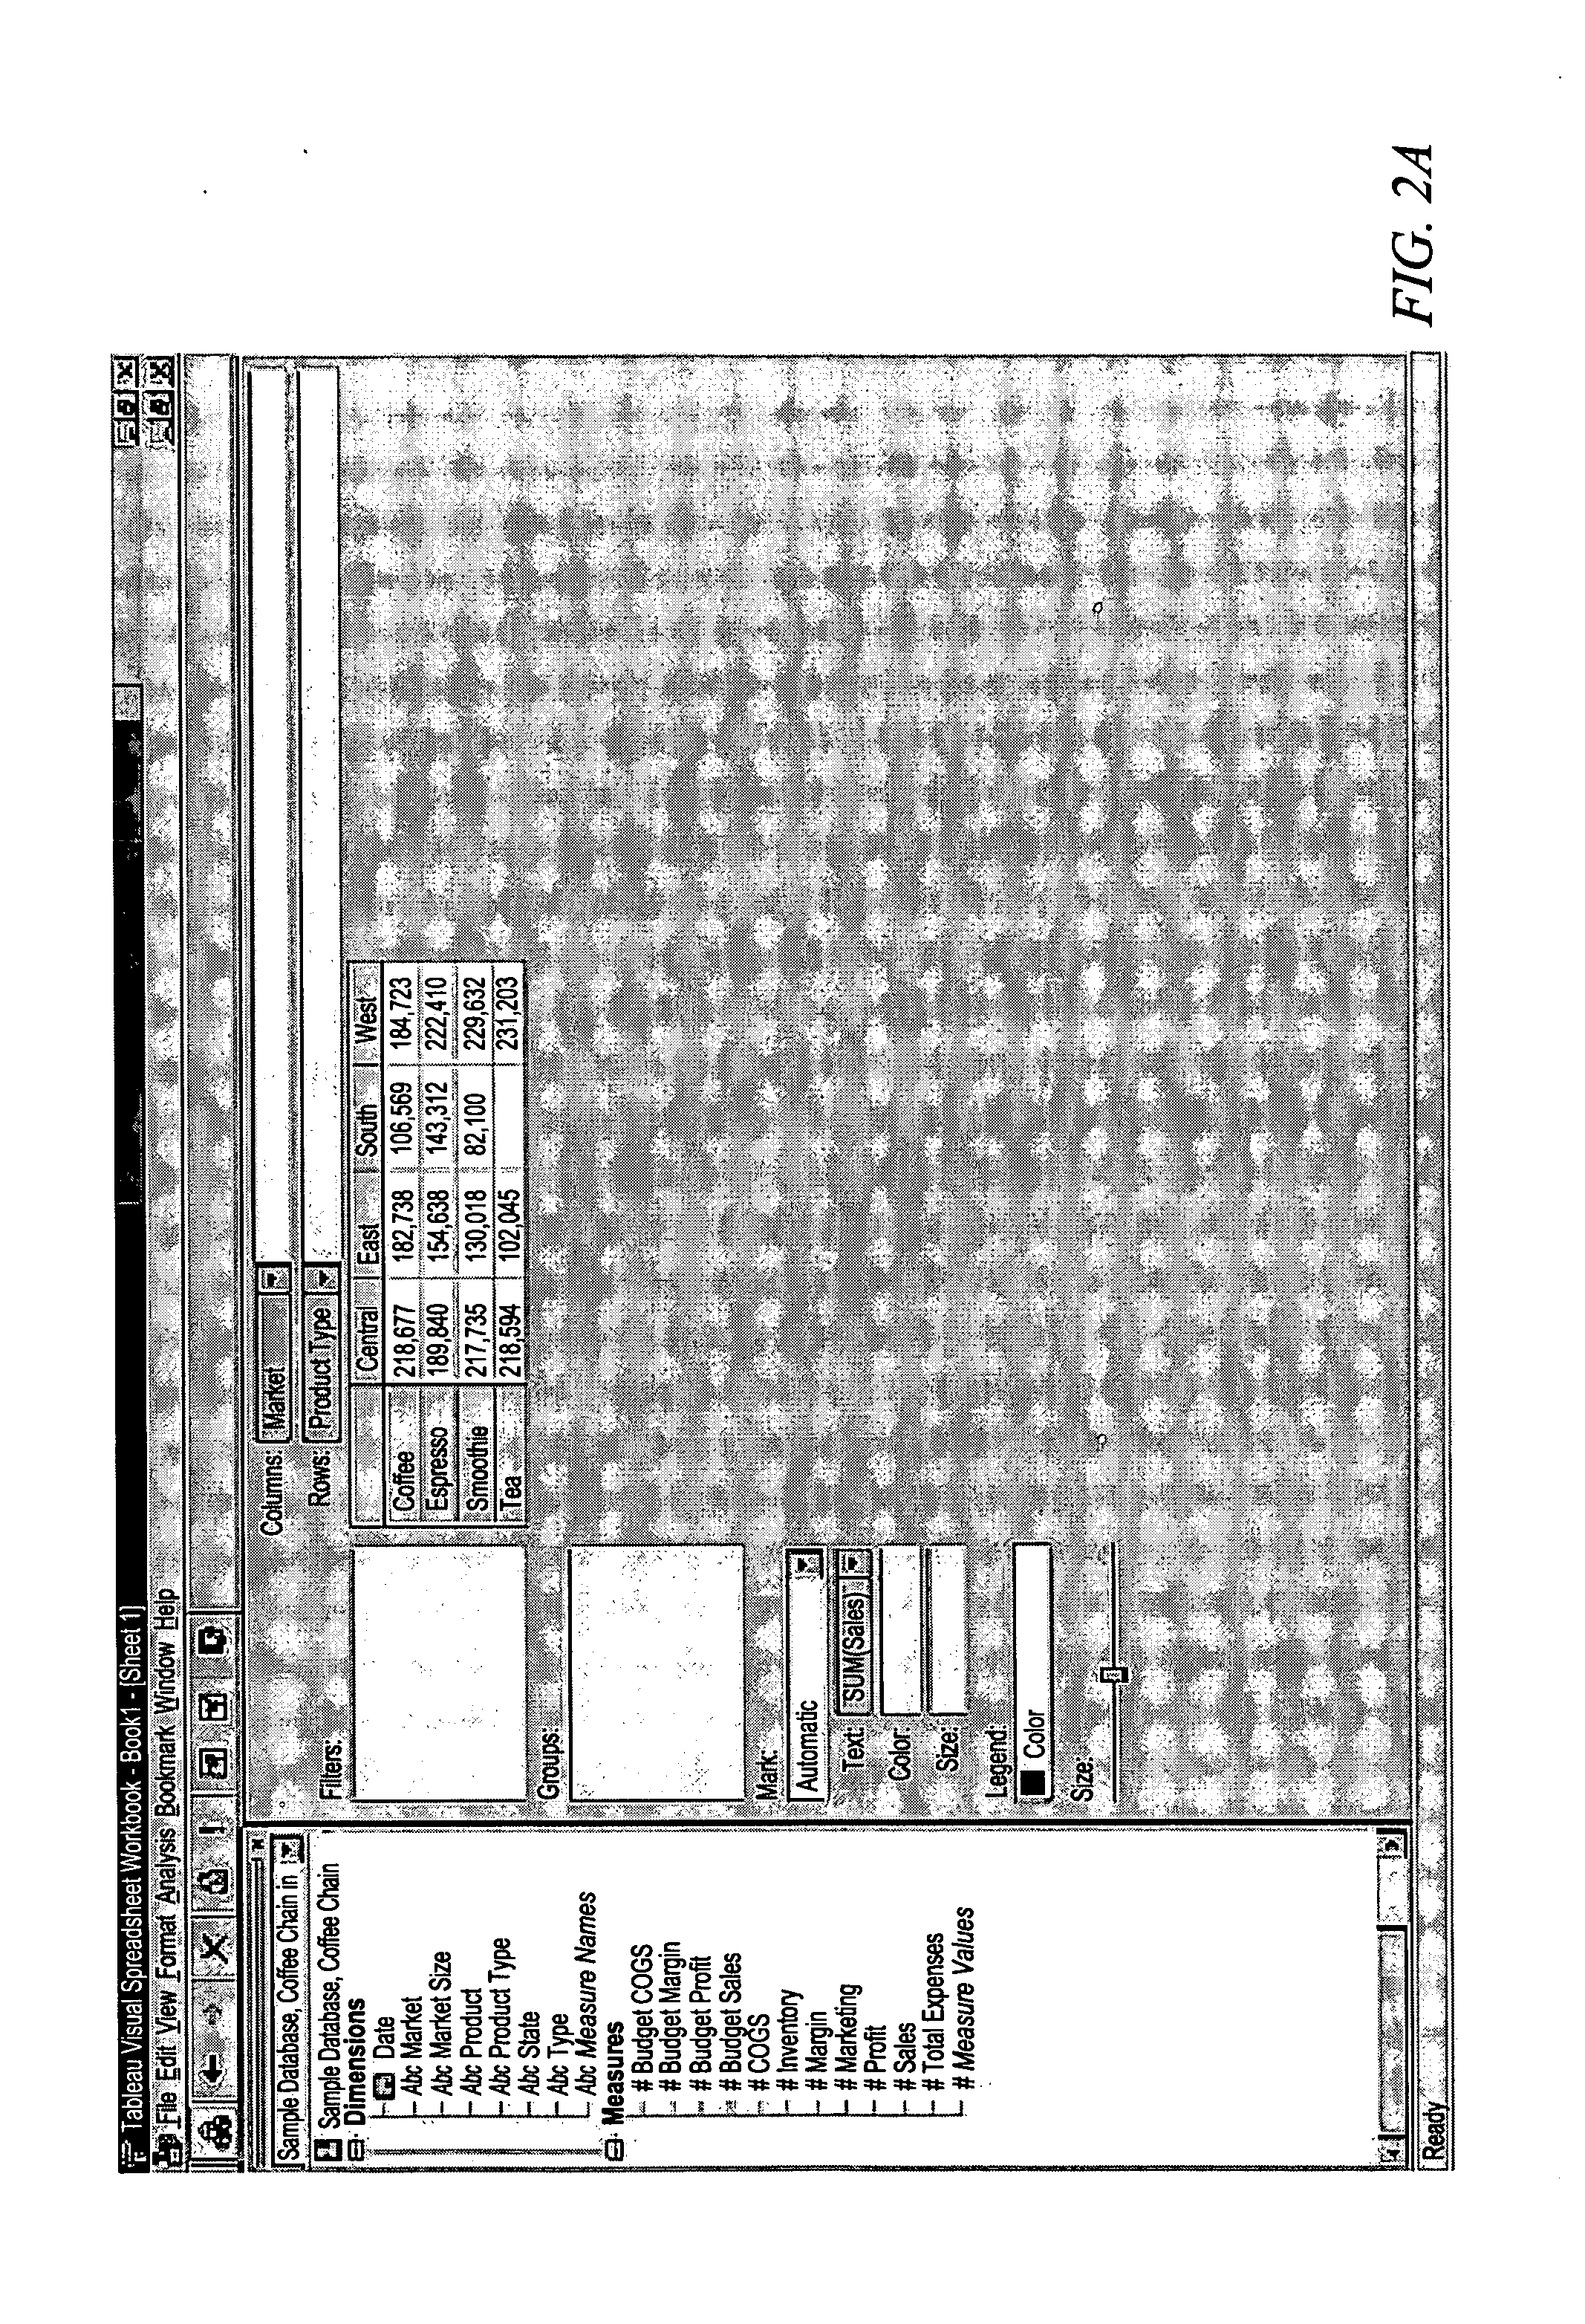 Computer systems and methods for visualizing data with generation of marks